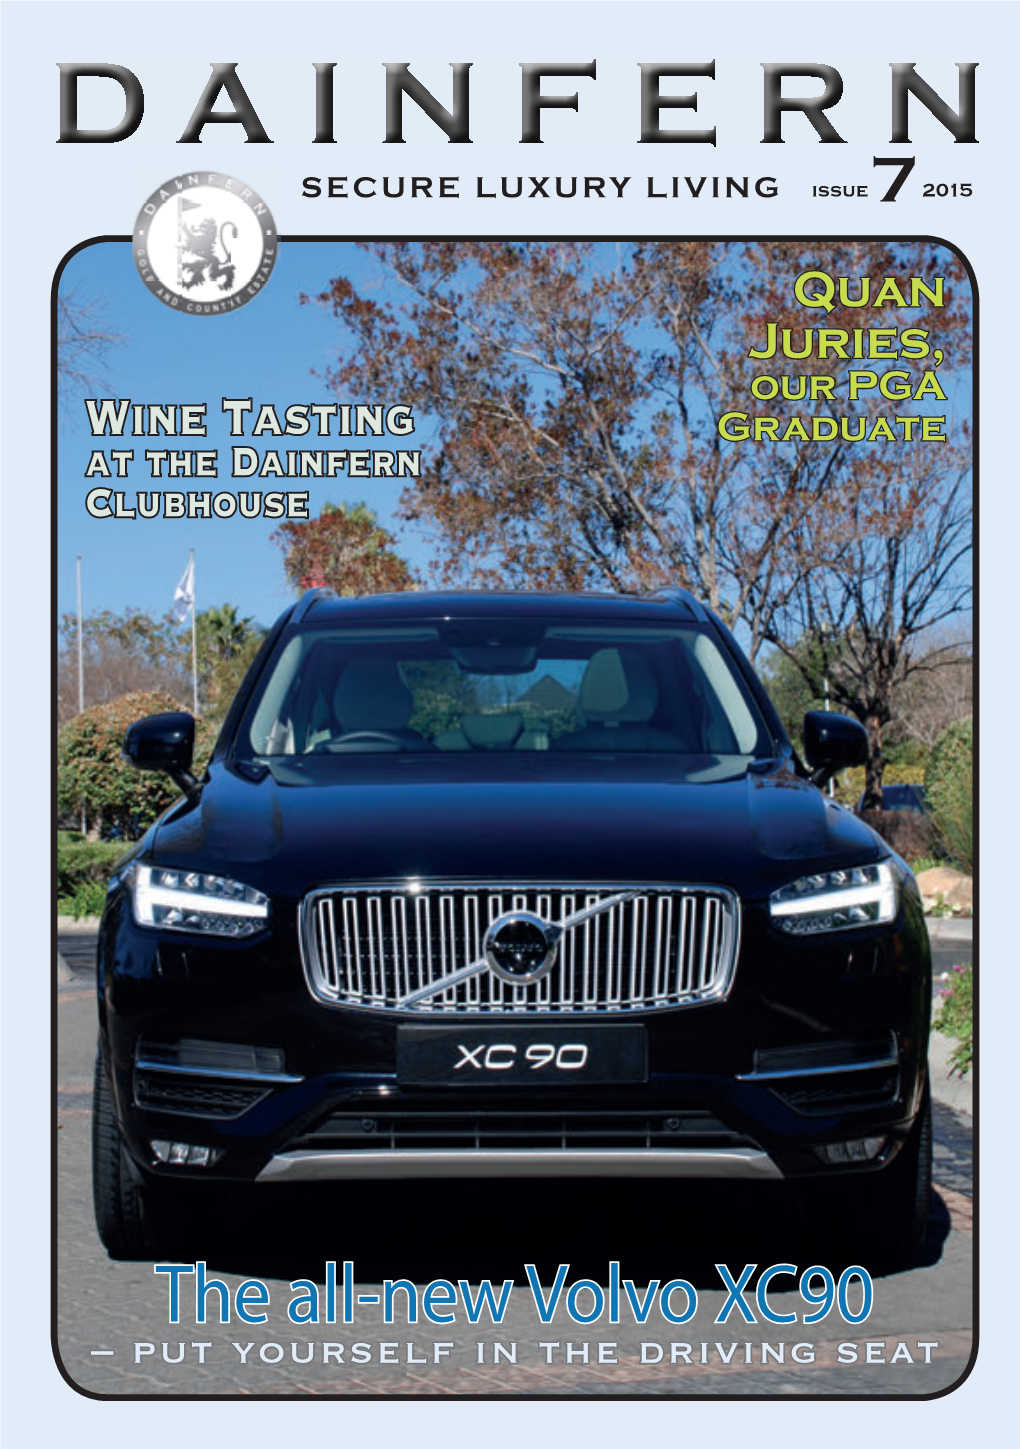 The All-New Volvo XC90 – Put Yourself in the Driving Seat Dainfern DPS 2015-07-27 12H17.Pdf 1 2015/07/27 12:17 PM